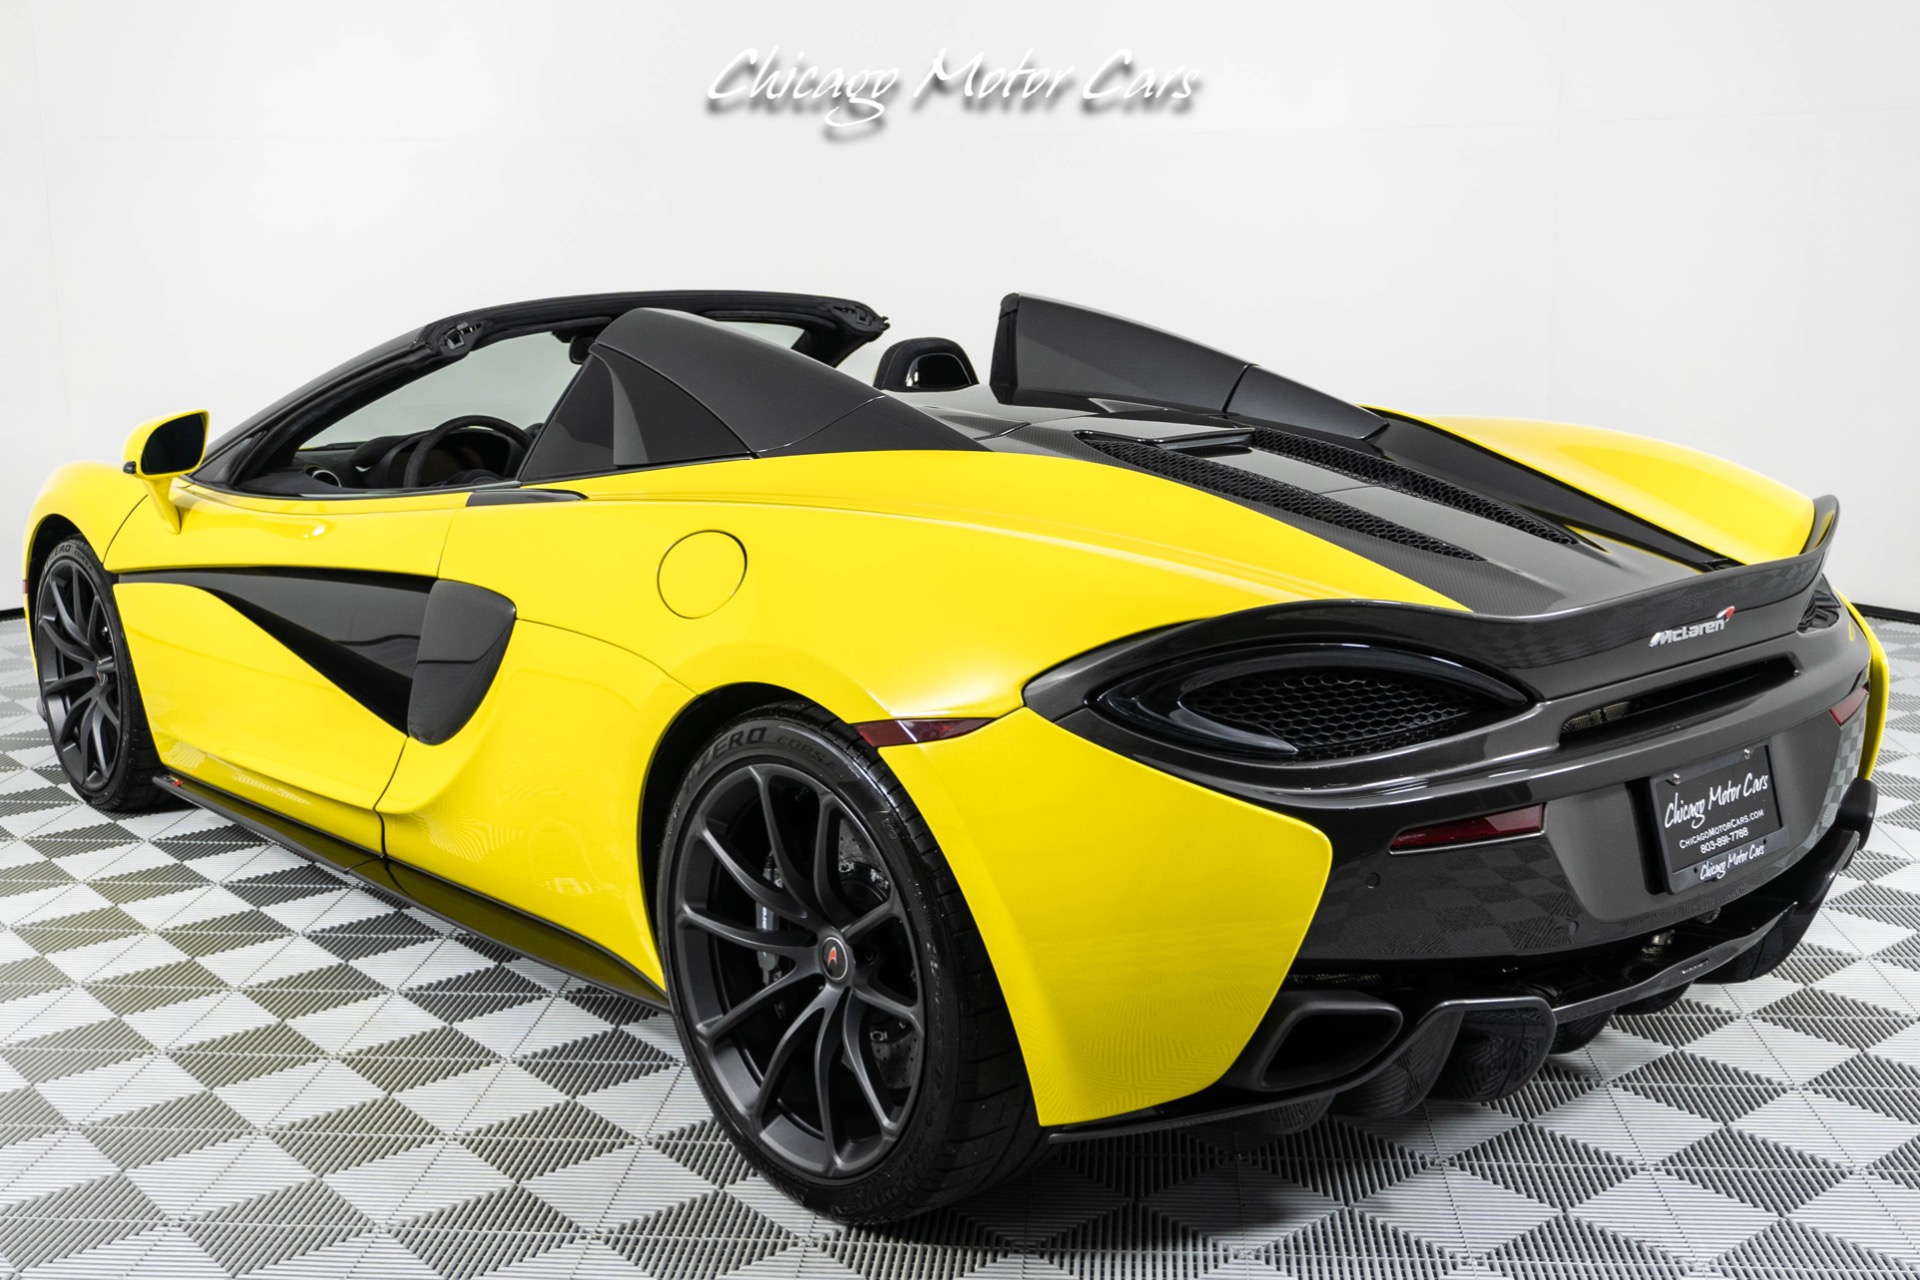 Used-2018-McLaren-570S-Spider-VEHICLE-FRONT-LIFT-SYSTEM-LOW-MILES-SPORT-EXHAUST